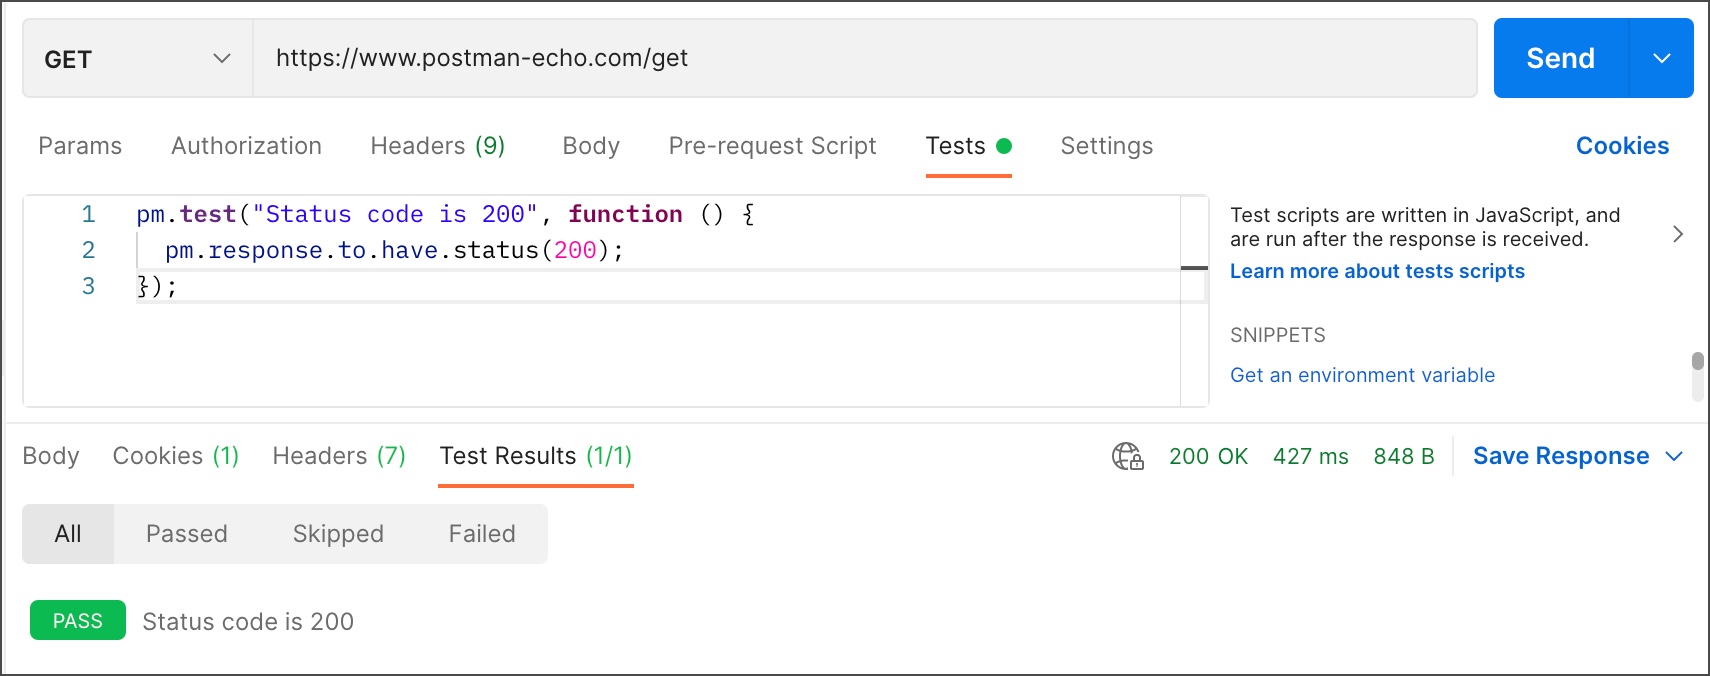 In Postman, we can add our own tests to check the API for errors